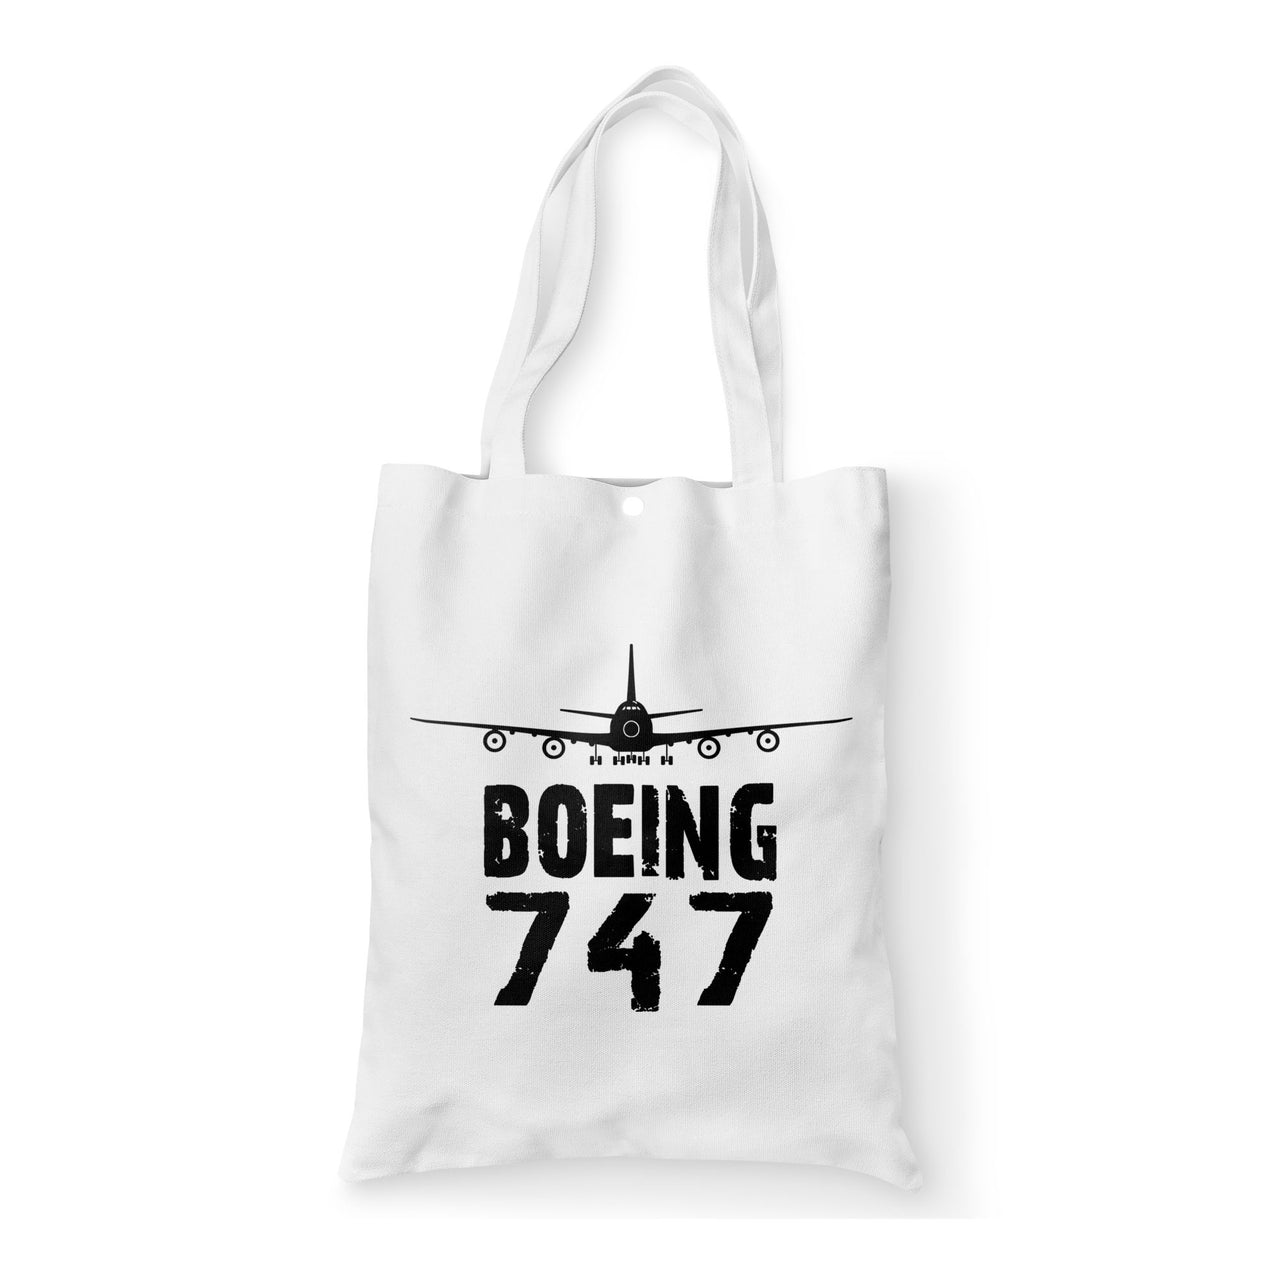 Boeing 747 & Plane Designed Tote Bags